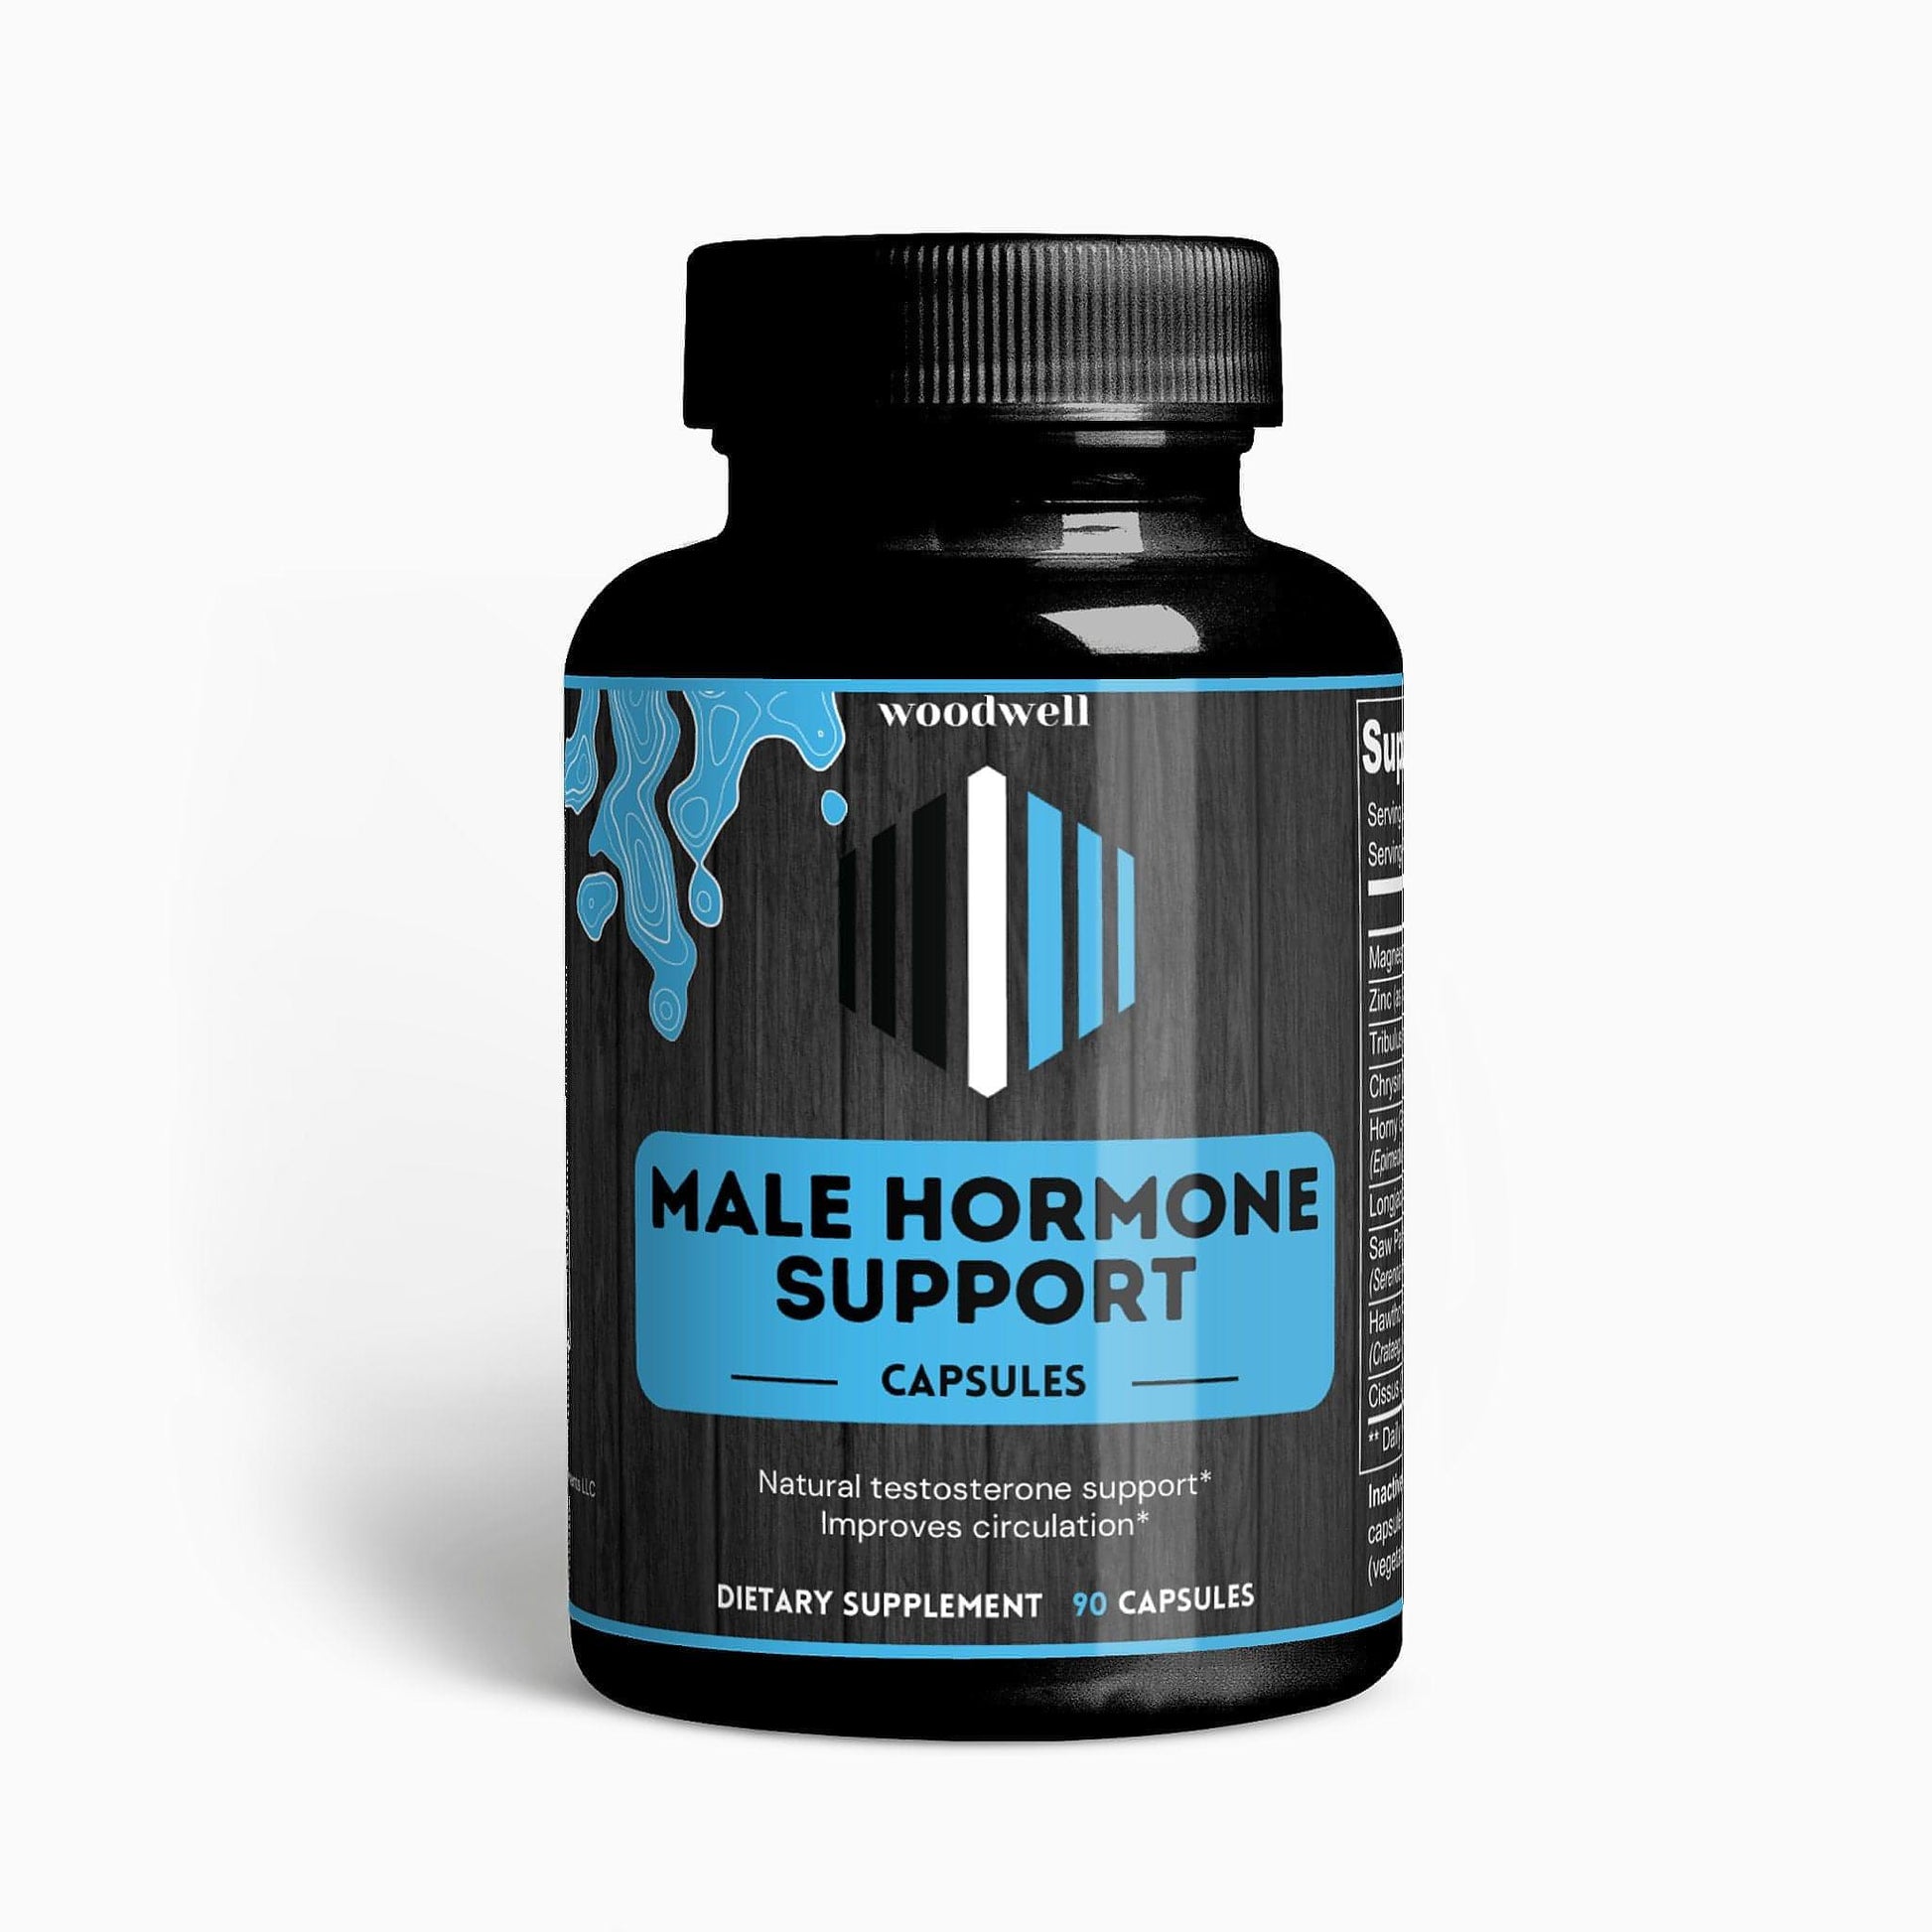 Male Hormone Support